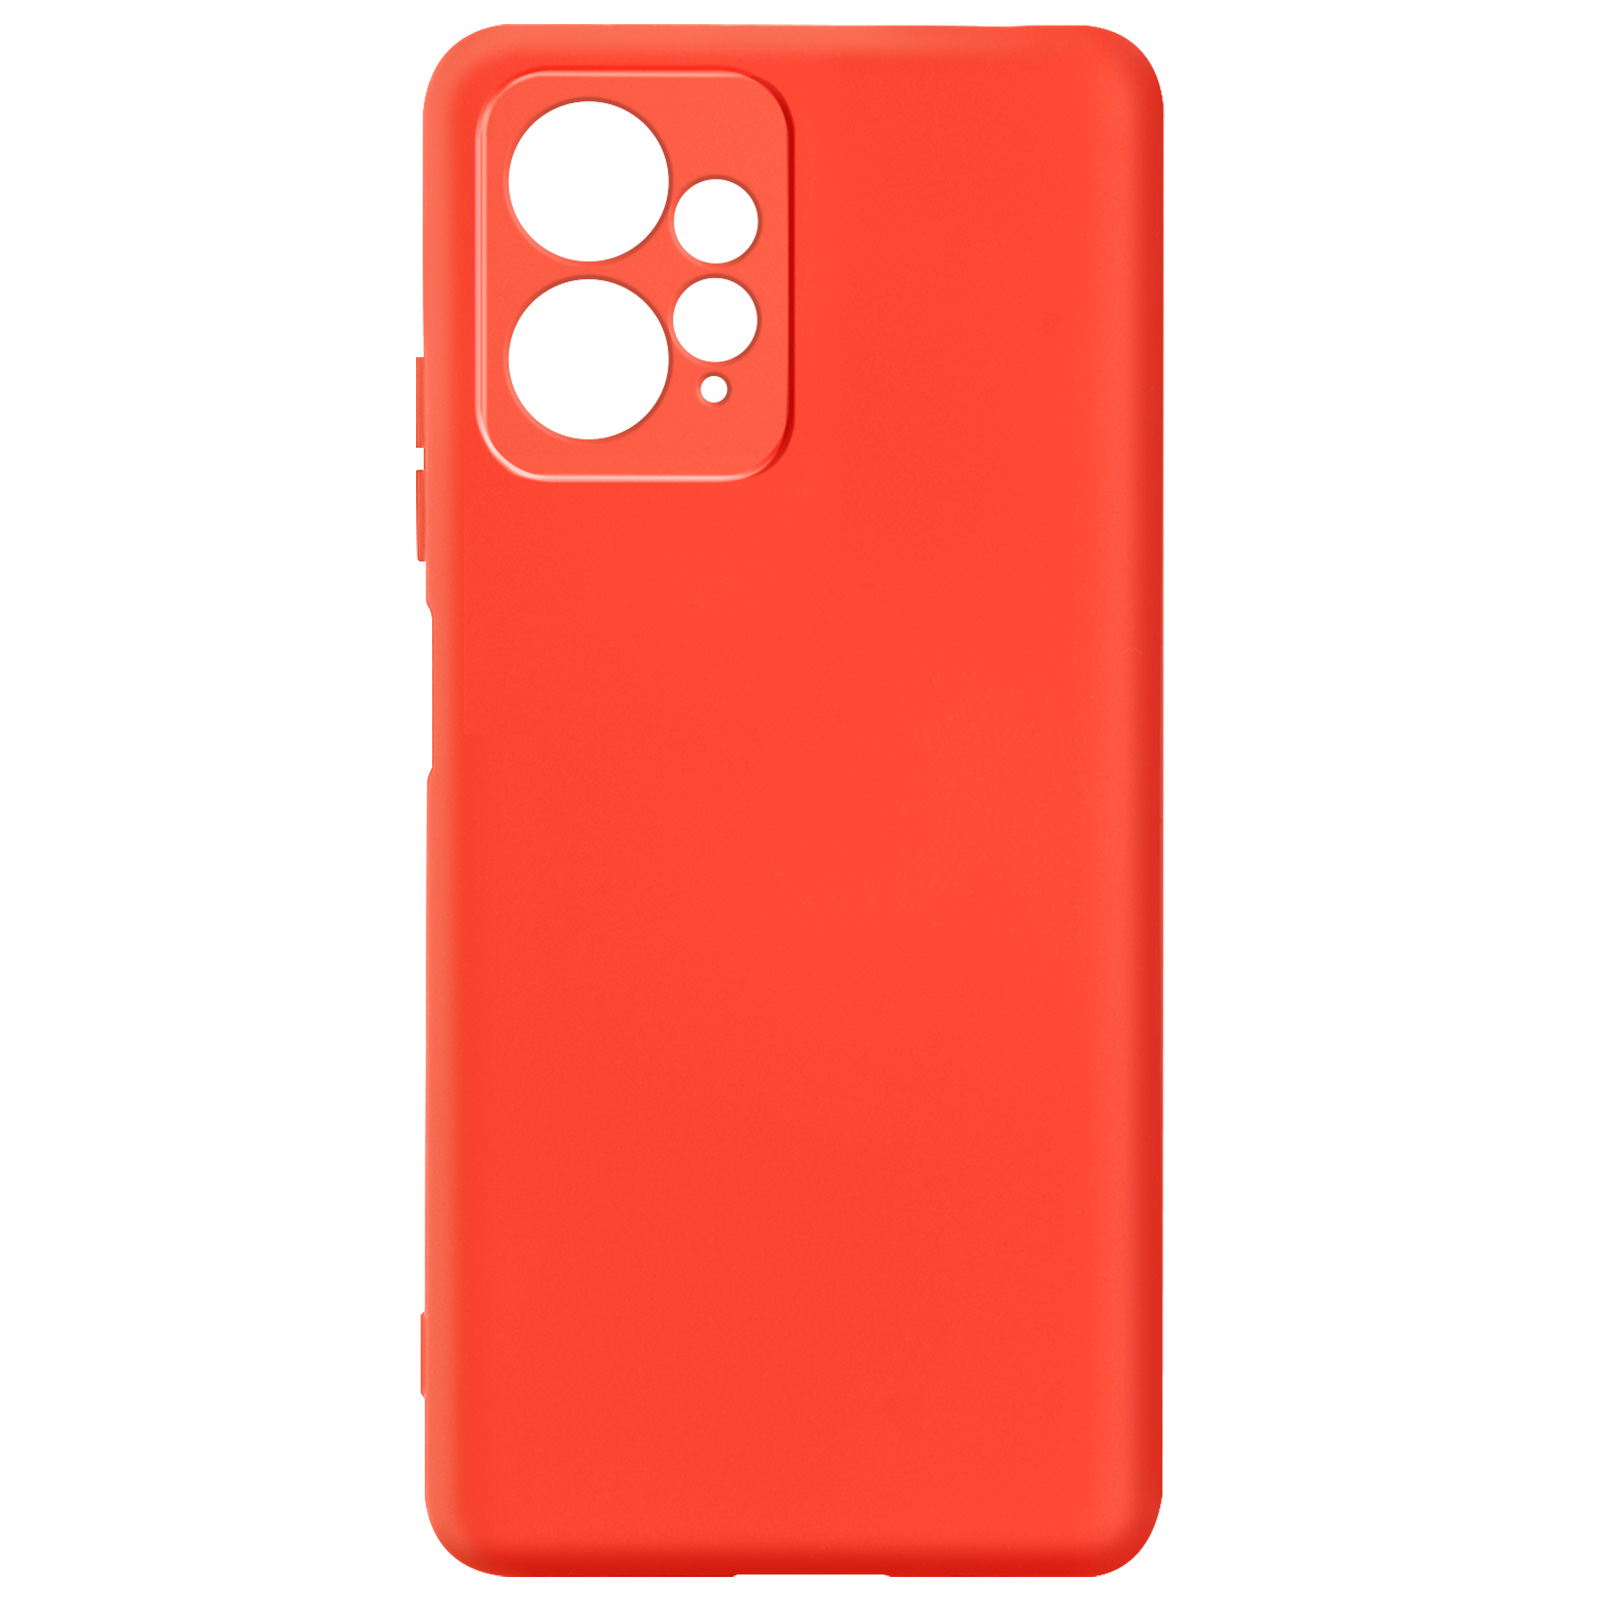 AVIZAR Note Touch Soft Redmi Rot Xiaomi, Series, Backcover, 12,